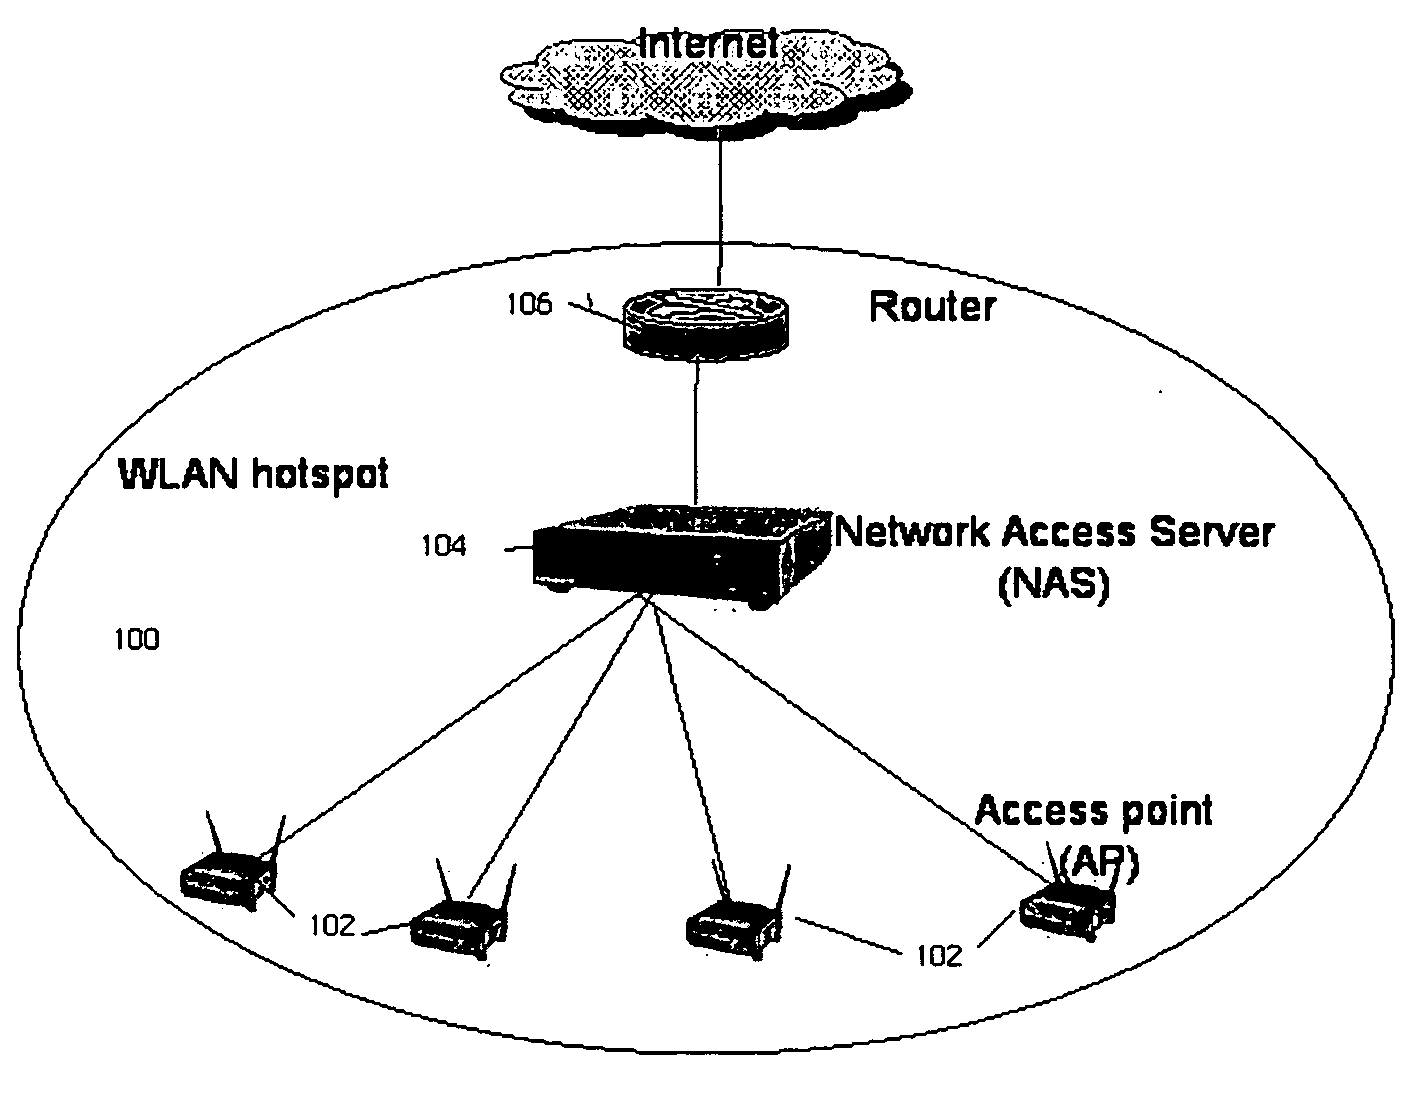 Network access server (NAS) discovery and associated automated authentication in heterogenous public hotspot networks